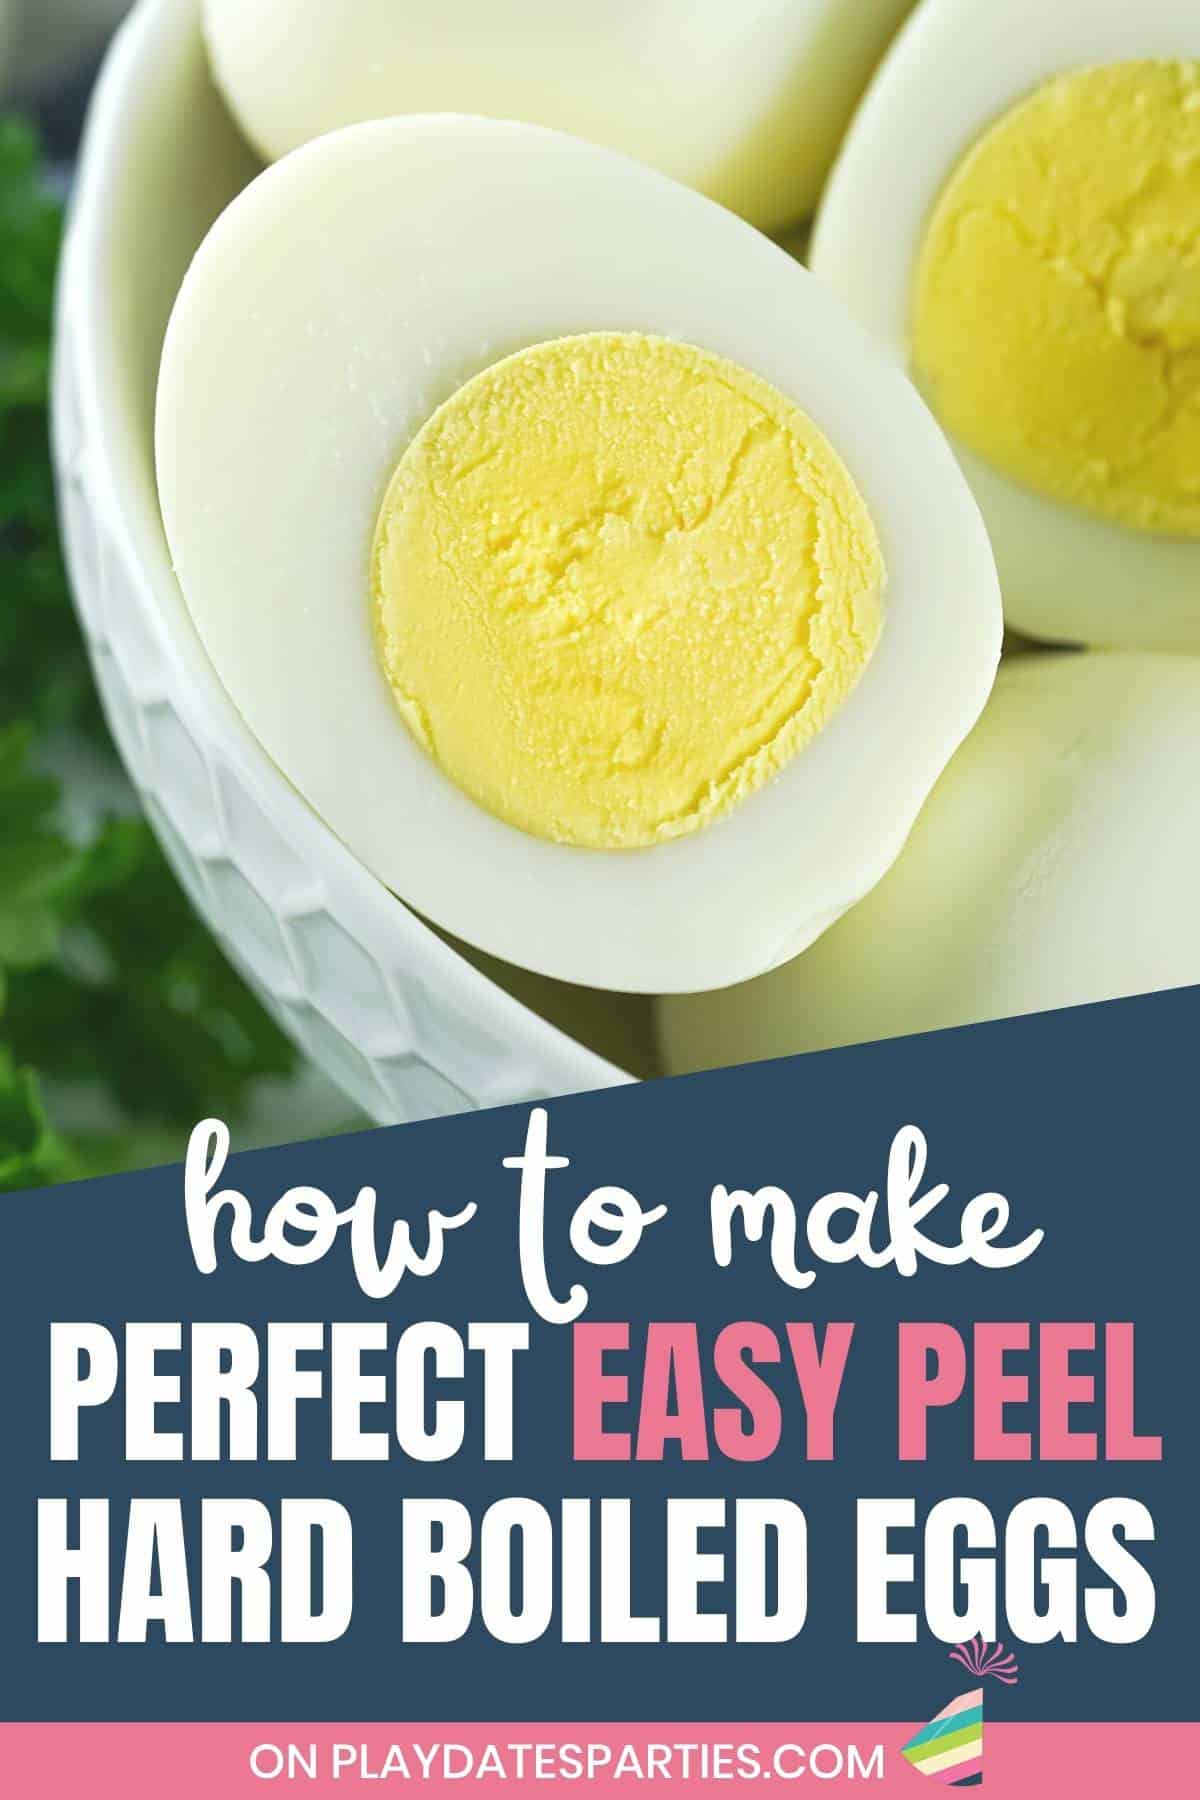 Close up of a hard boiled egg cut in half with text overlay how to make perfect easy peel hard boiled eggs.